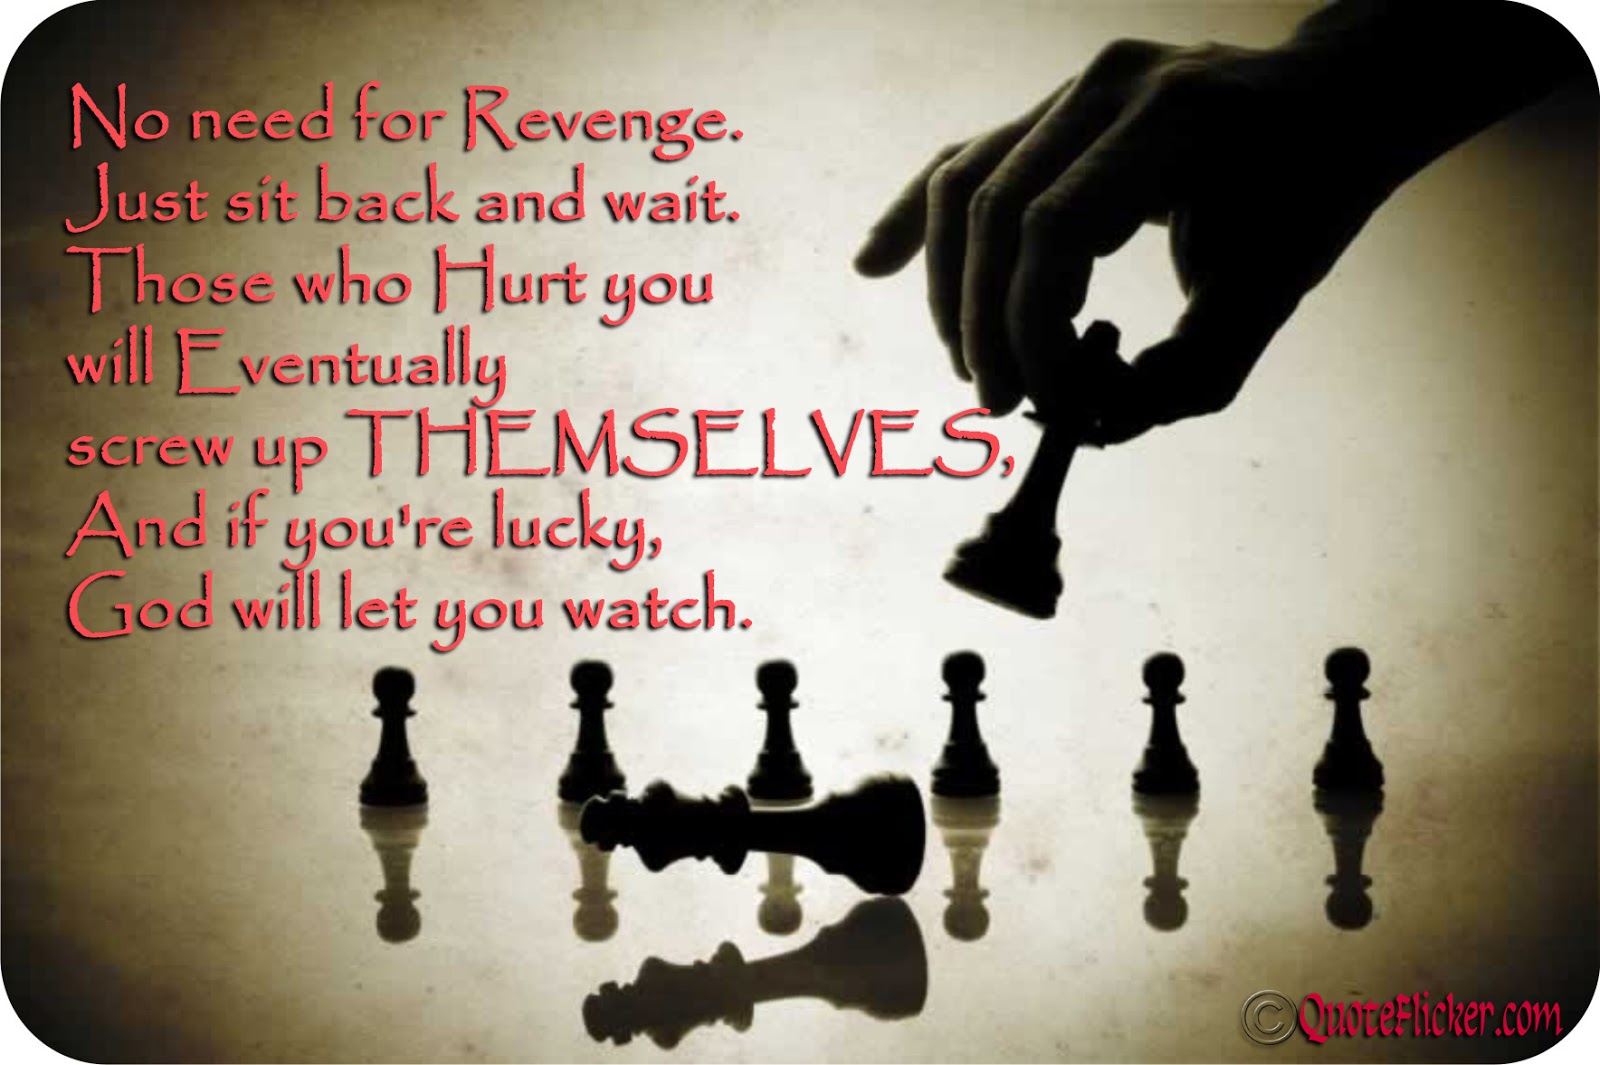 No need for revenge. Just sit back and wait. Those who hurt you will eventually screw up themselves, and if you're lucky, God will let you watch.